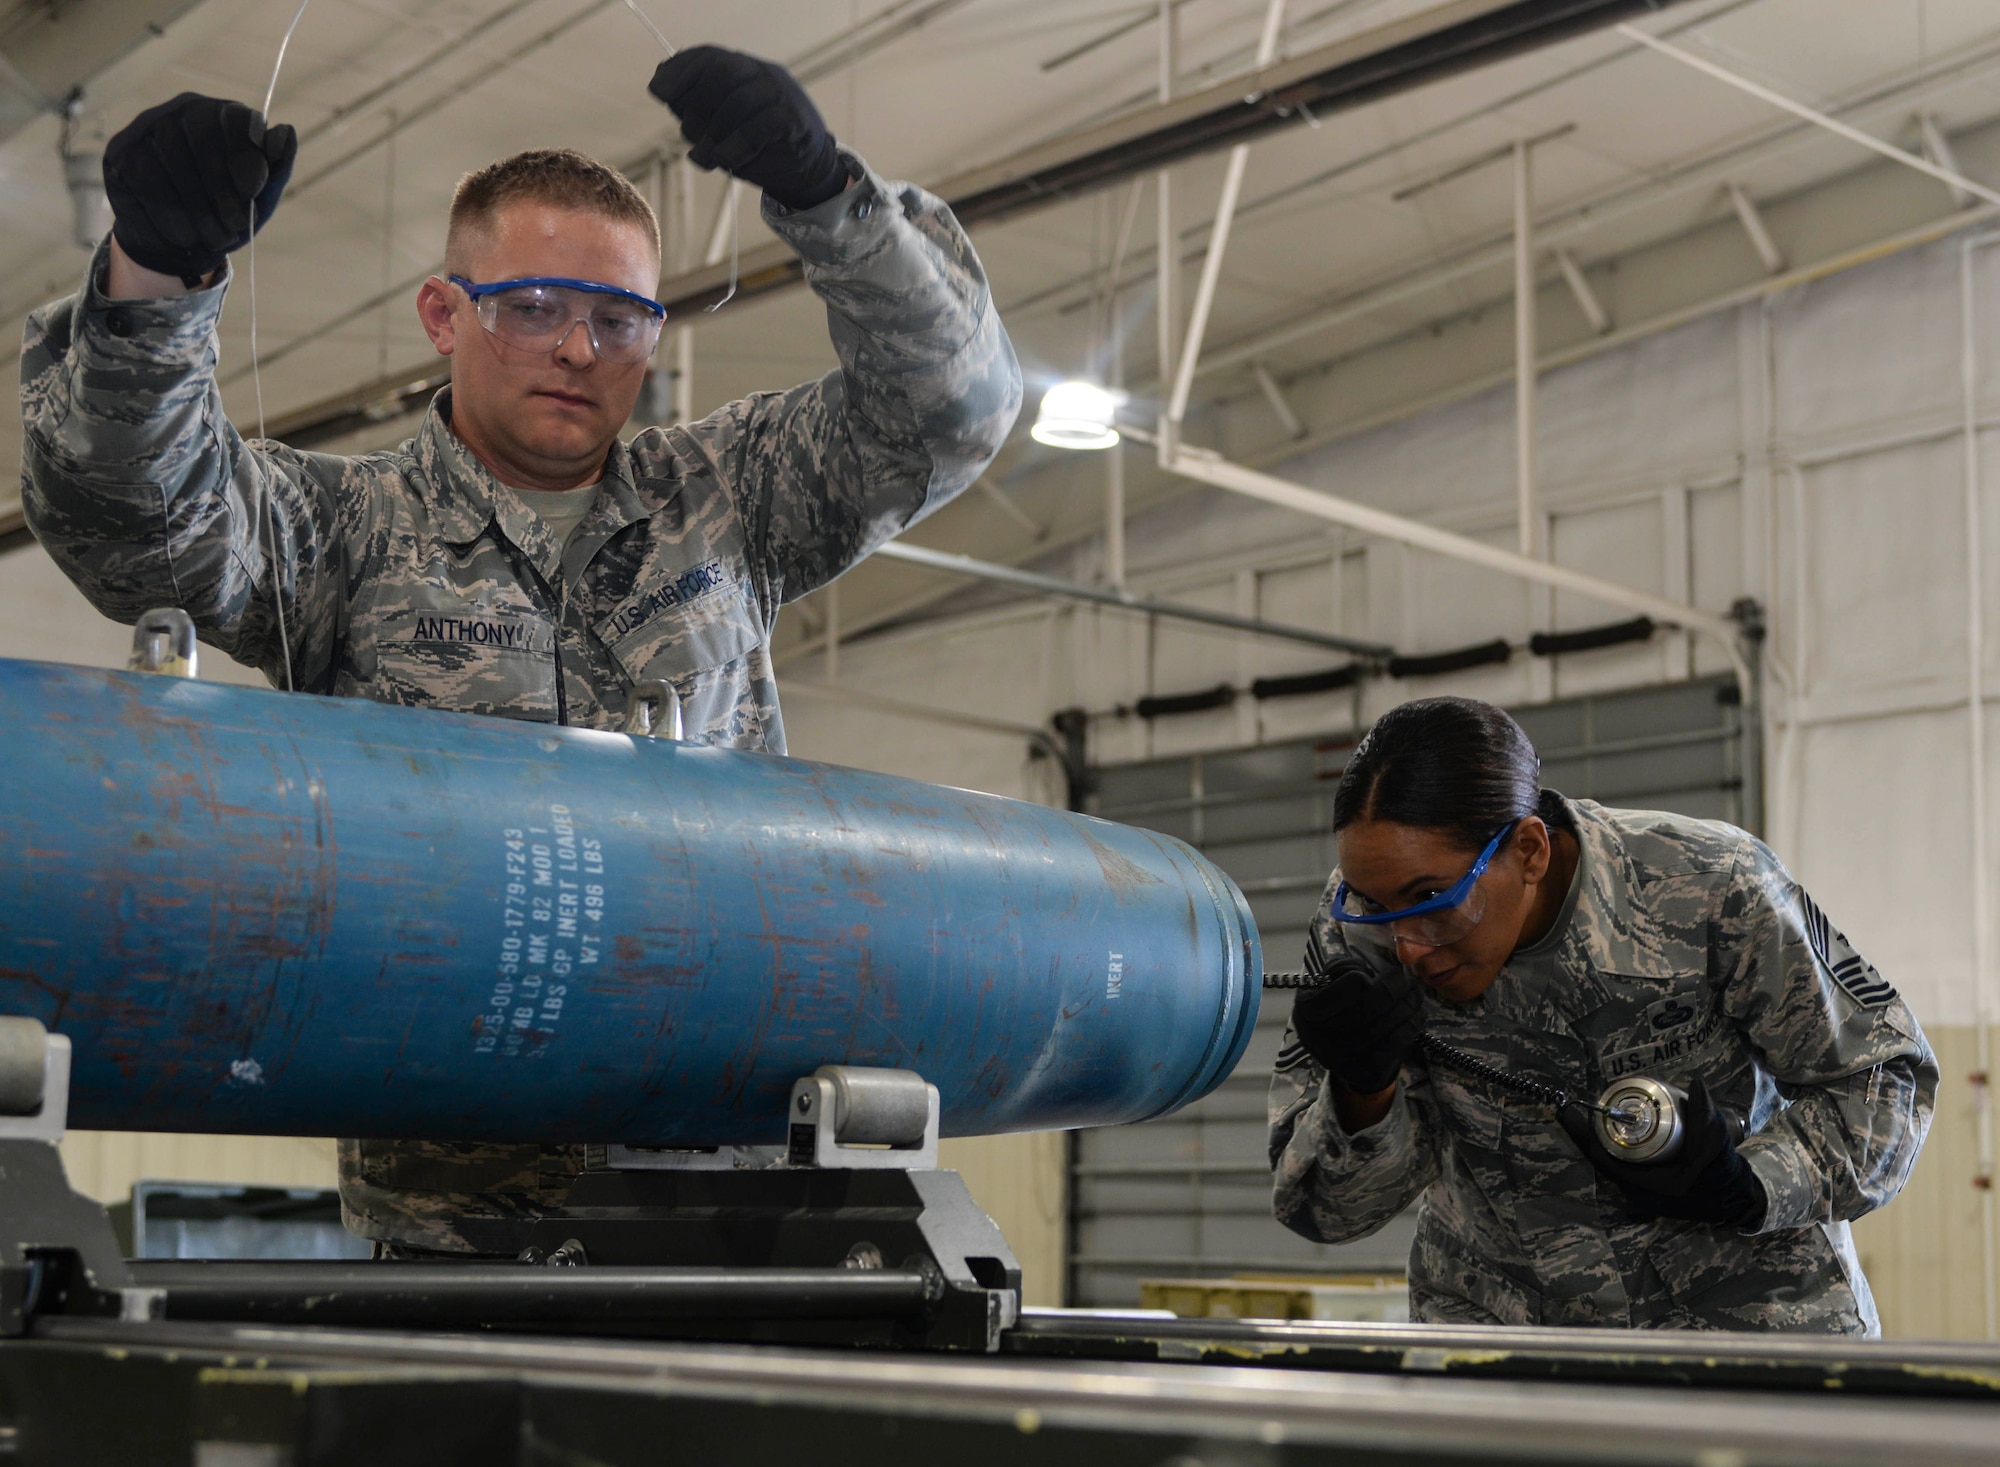 Senior Airman Justin Anthony, 28th Munitions Squadron conventional maintenance crew chief, left, assists Chief Master Sgt. Sonia Lee, 28th Bomb Wing command chief, in loading an FM-152 fuse into an inert GBU-38 v1 during an immersion tour at Ellsworth Air Force Base, S.D., June 27, 2016. Ellsworth’s conventional maintenance crews take an average of 25 minutes to build the 500-pound munition. (U.S. Air Force photo by Airman 1st Class Sadie Colbert/Released)